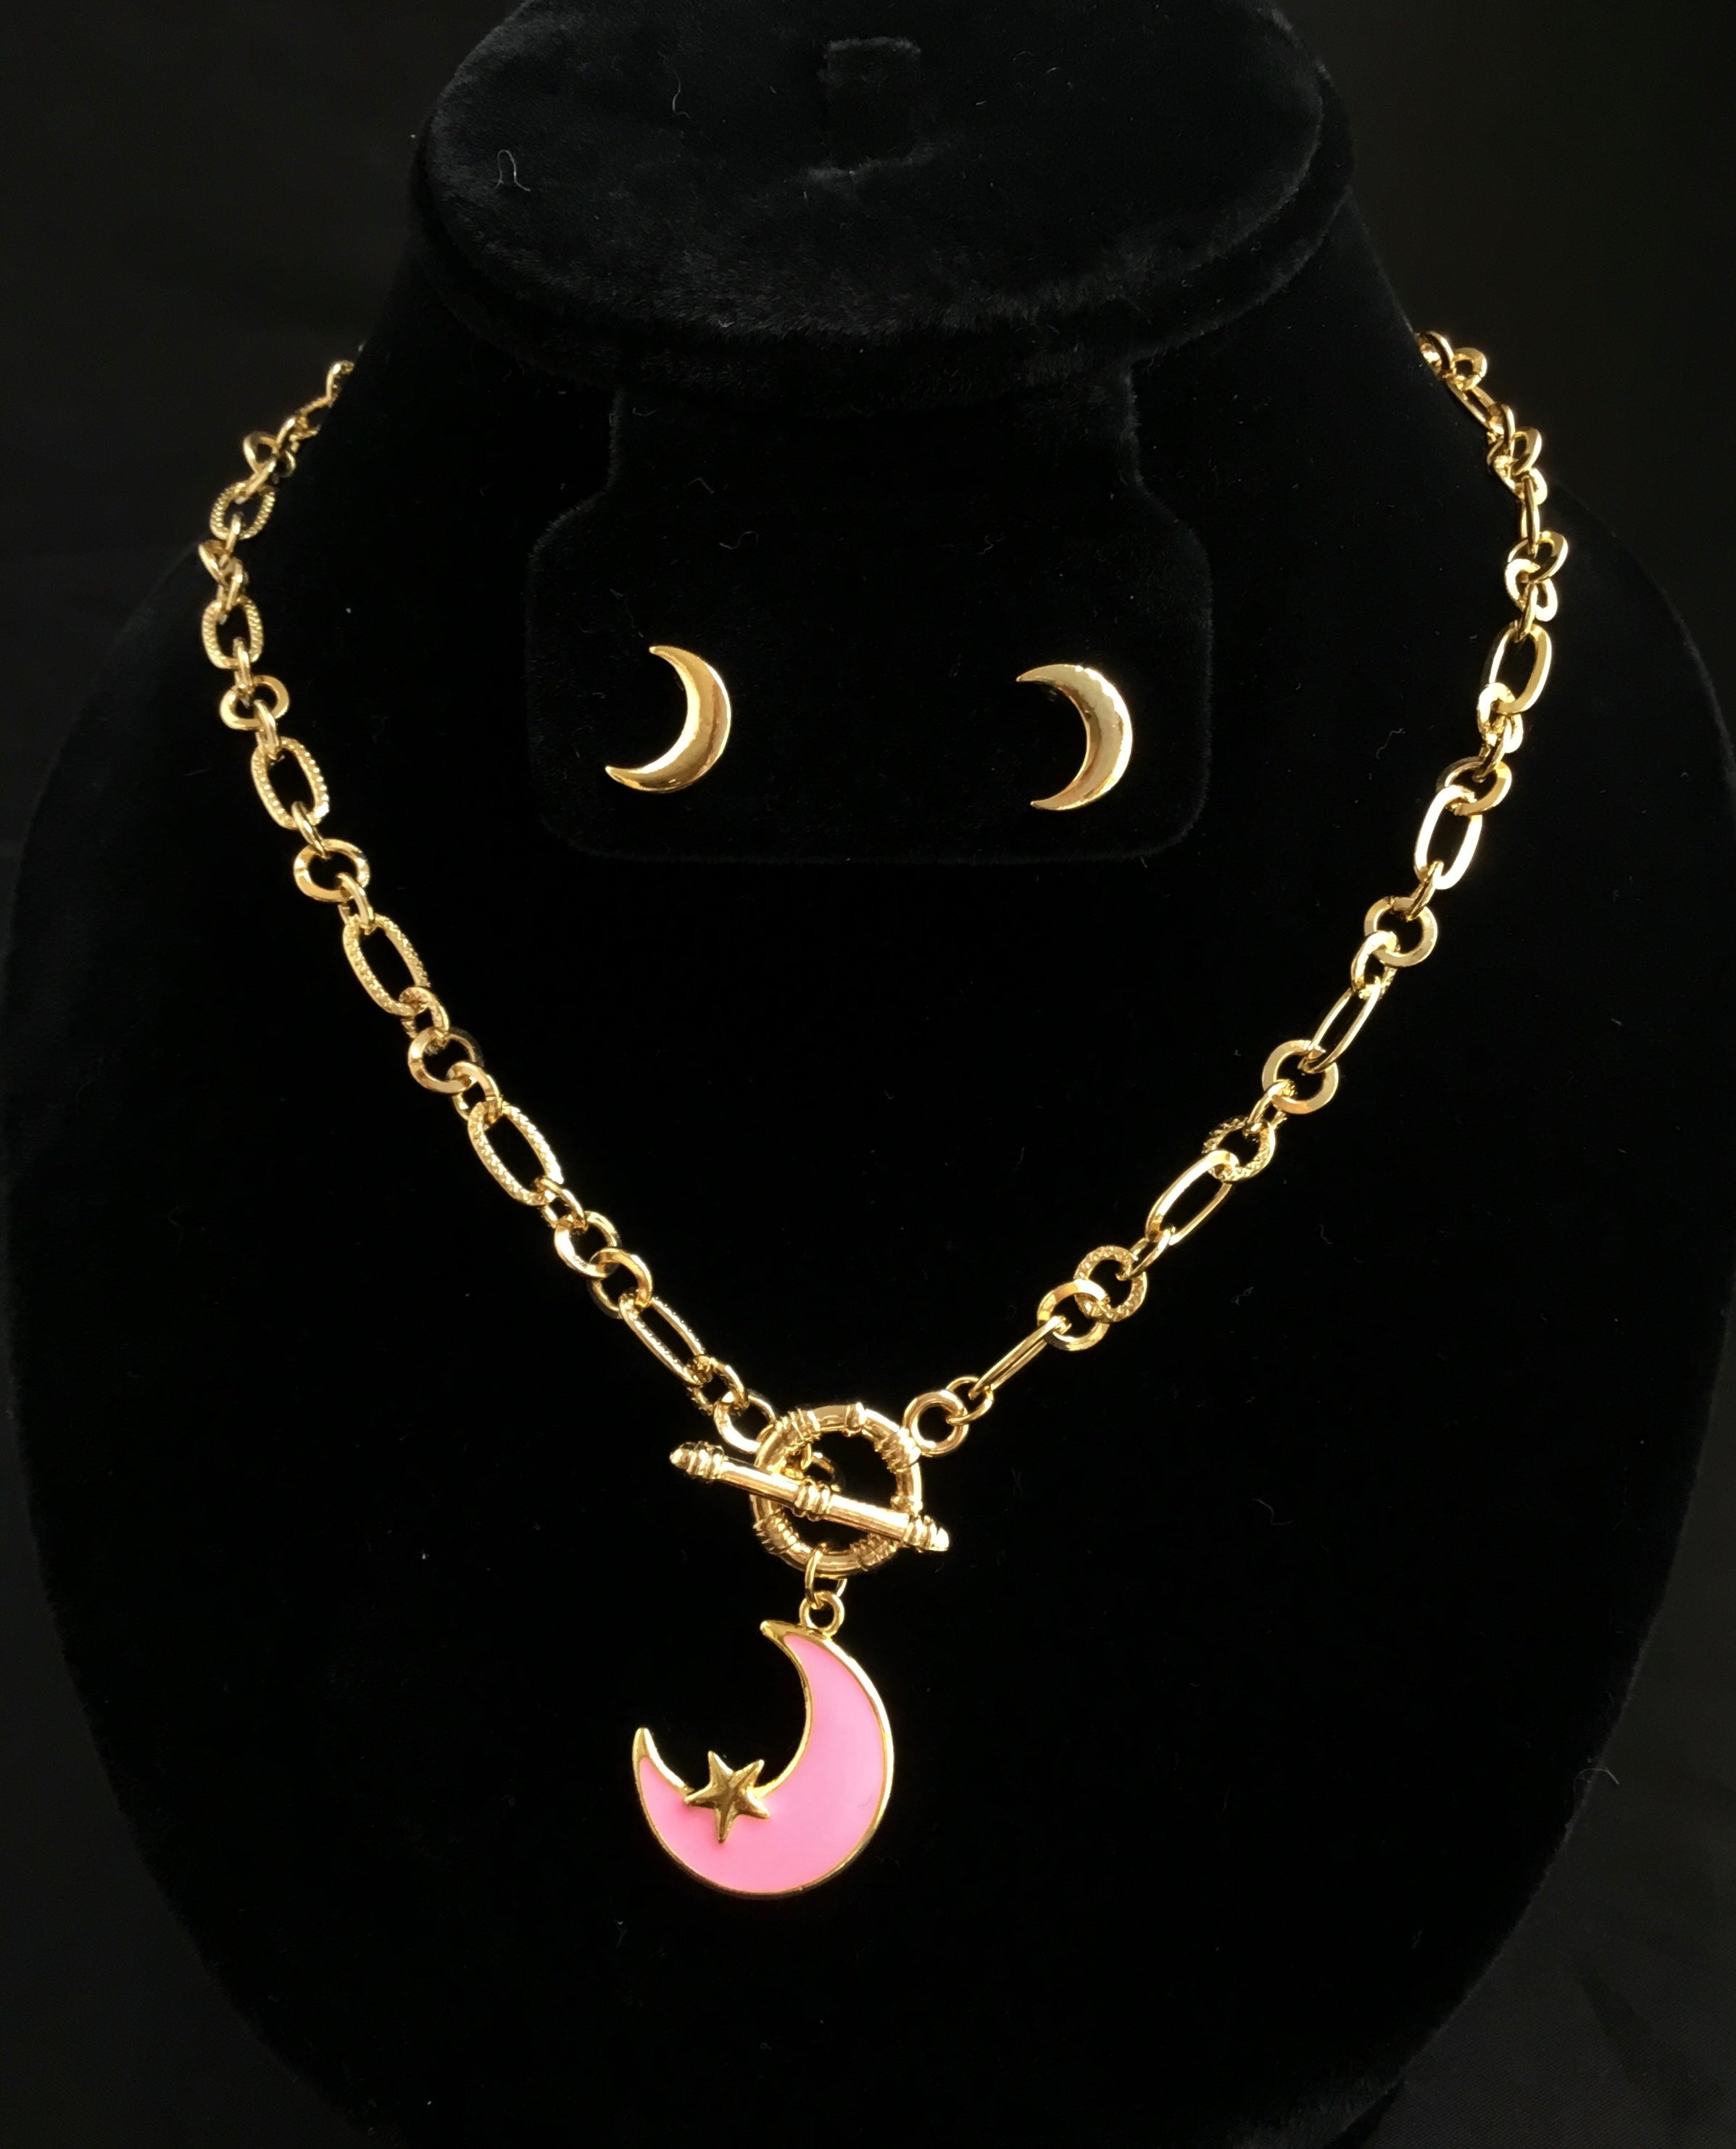 Gold Filled Links Necklace, Moon Charm and Earrings